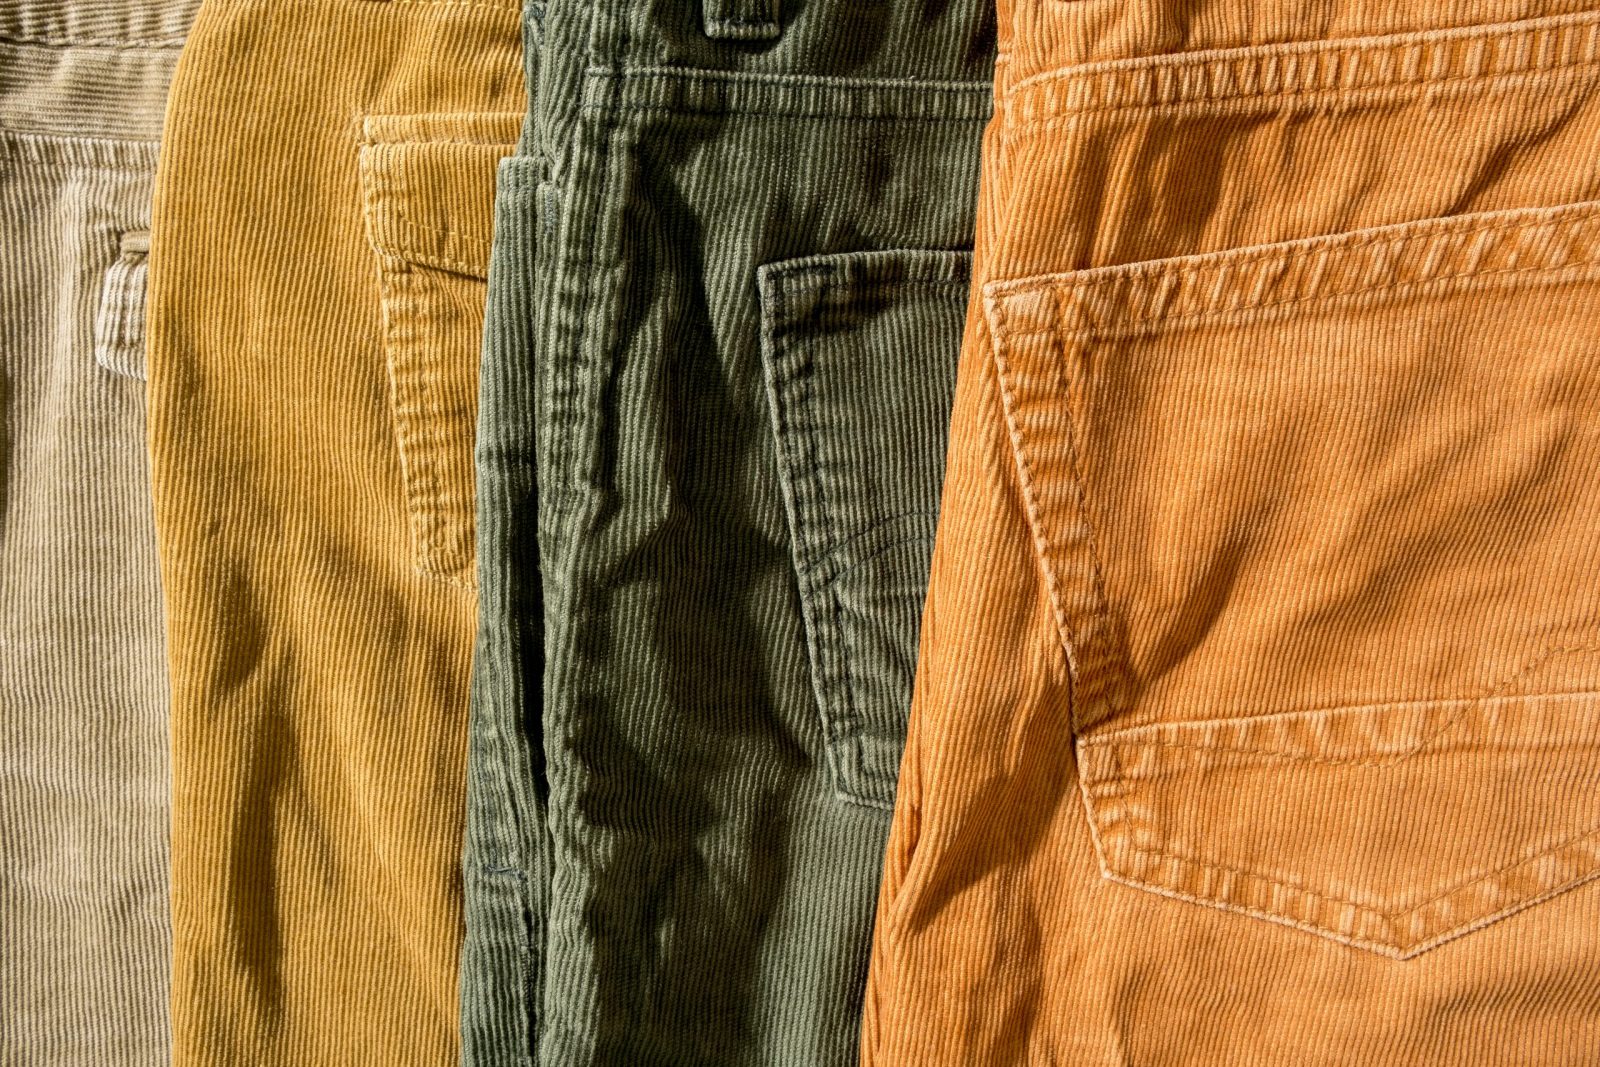 Four different colors of corduroy pants lined up